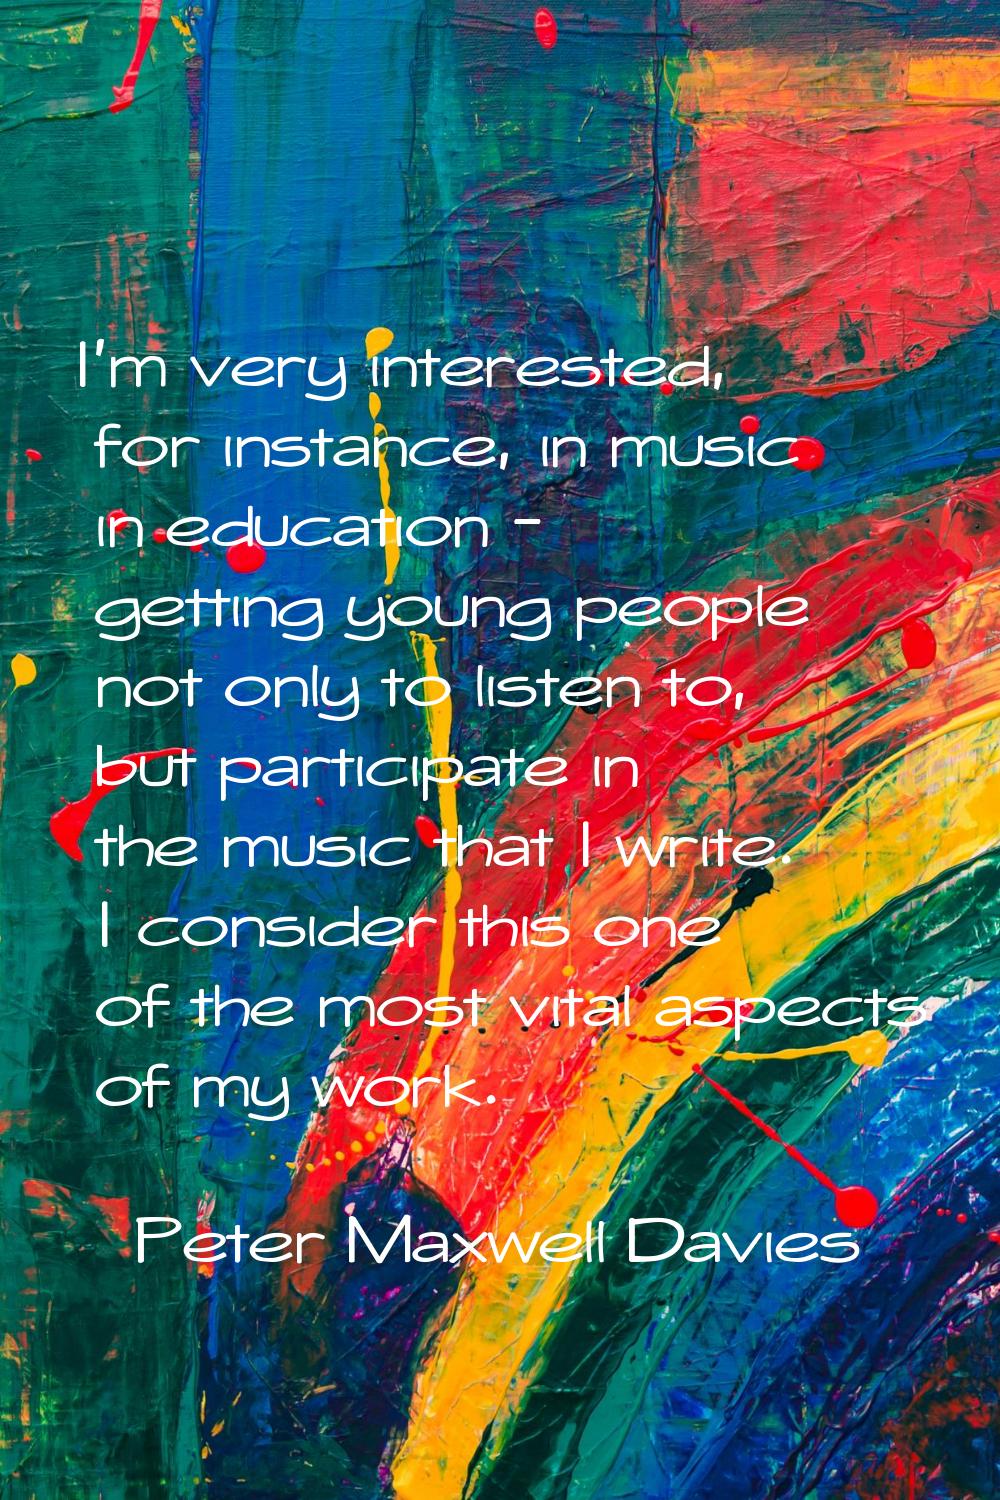 I'm very interested, for instance, in music in education - getting young people not only to listen 